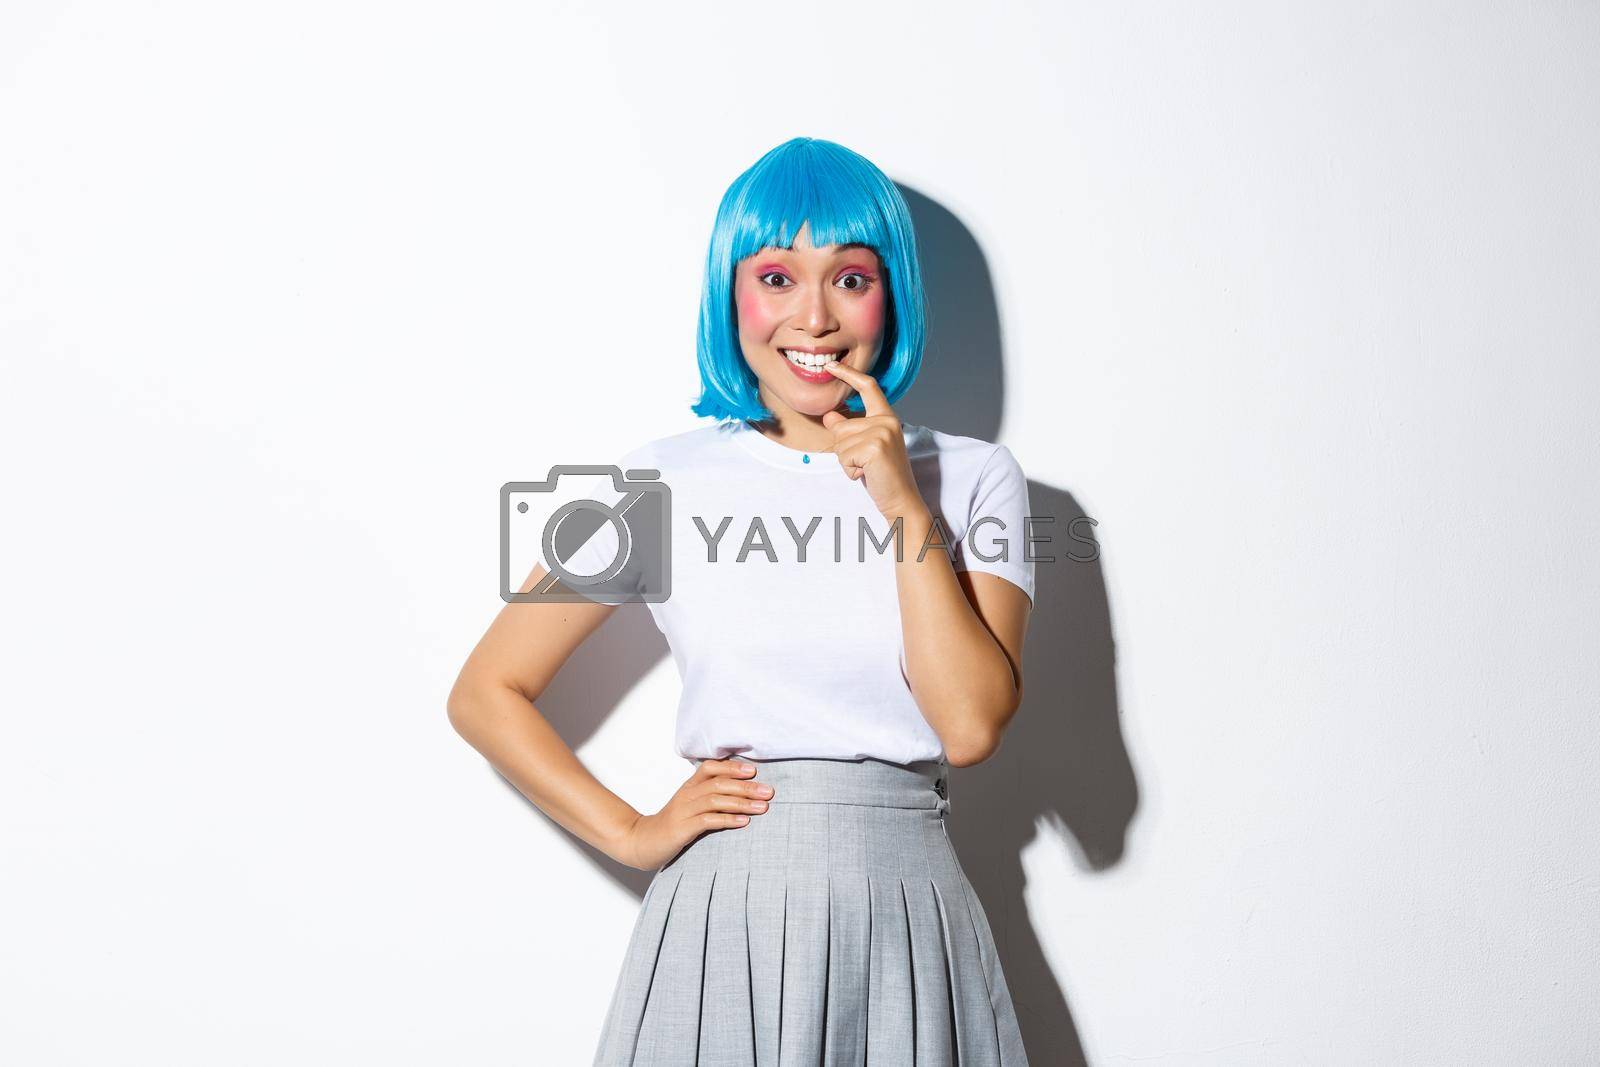 Royalty free image of Portrait of girl tempted to try something, looking with desire at camera, biting finger and smiling excited, wearing blue party wig for halloween, standing over white background by Benzoix